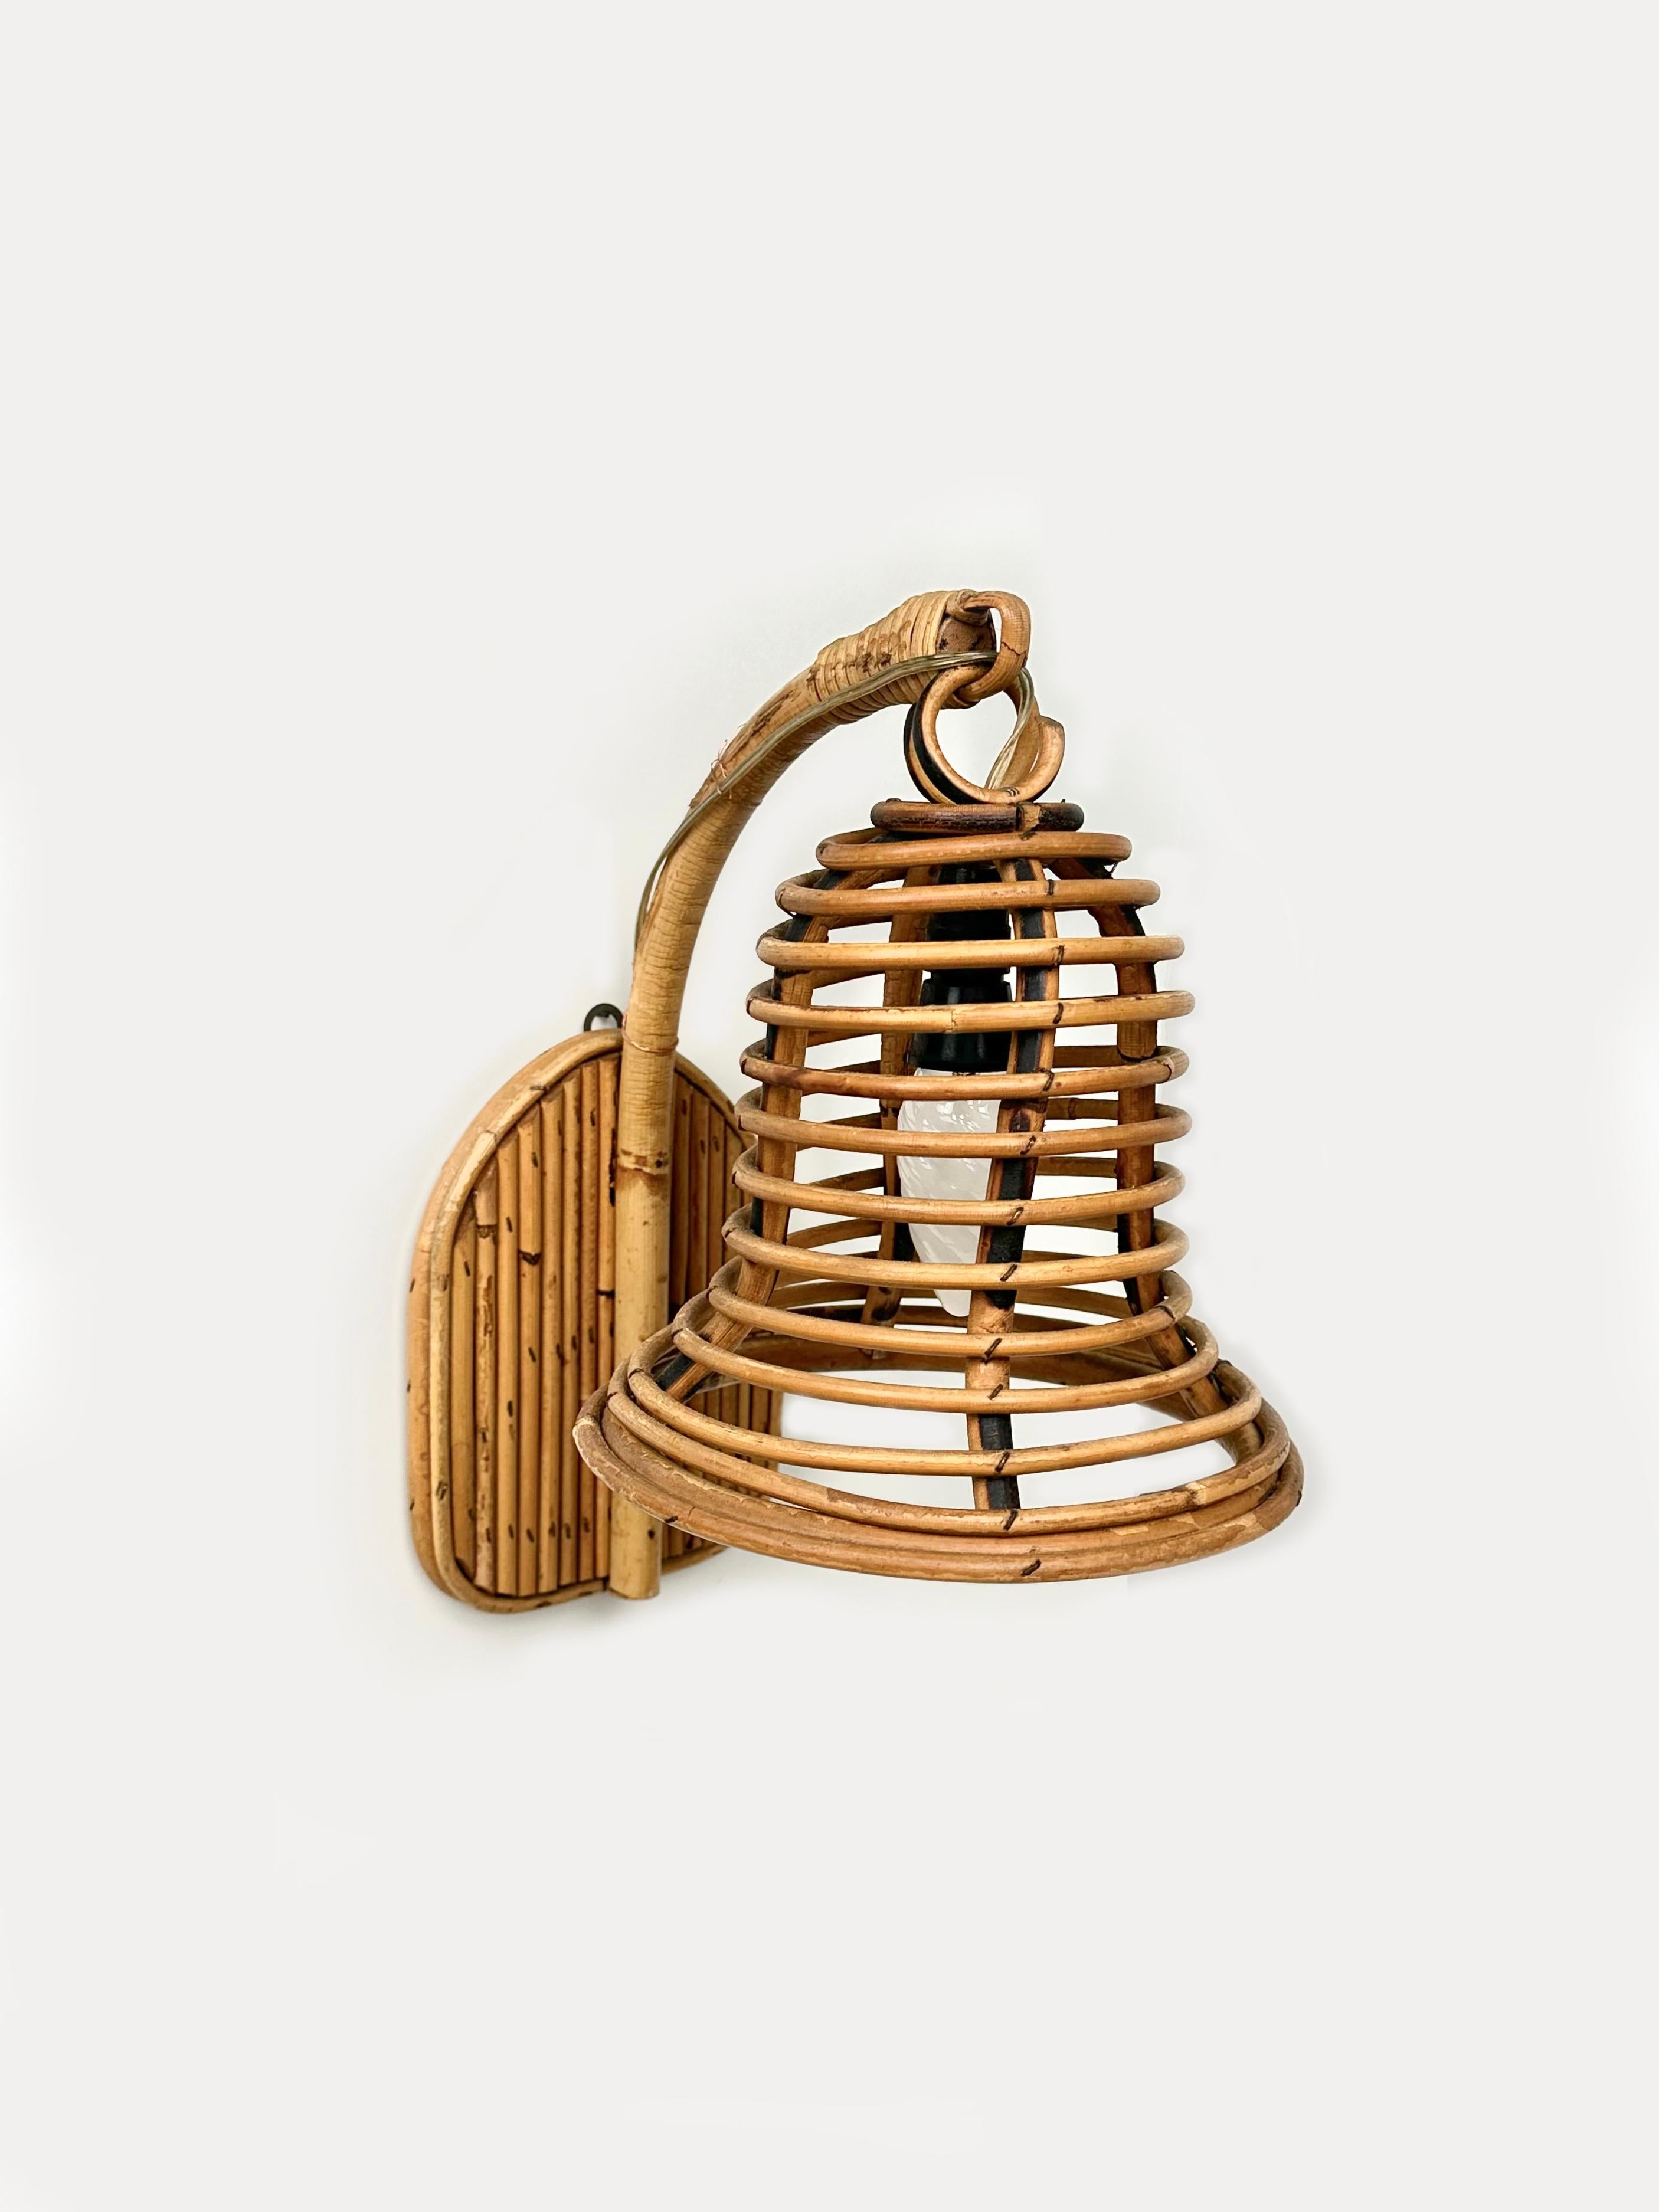 Sconce wall lamp in bamboo and rattan in the style of French designer Louis Sognot.

Made in Italy in the 1960s.

Louis Sognot was a French designer best known for his elegant furniture made from a combination of rattan and wood. Sognot was